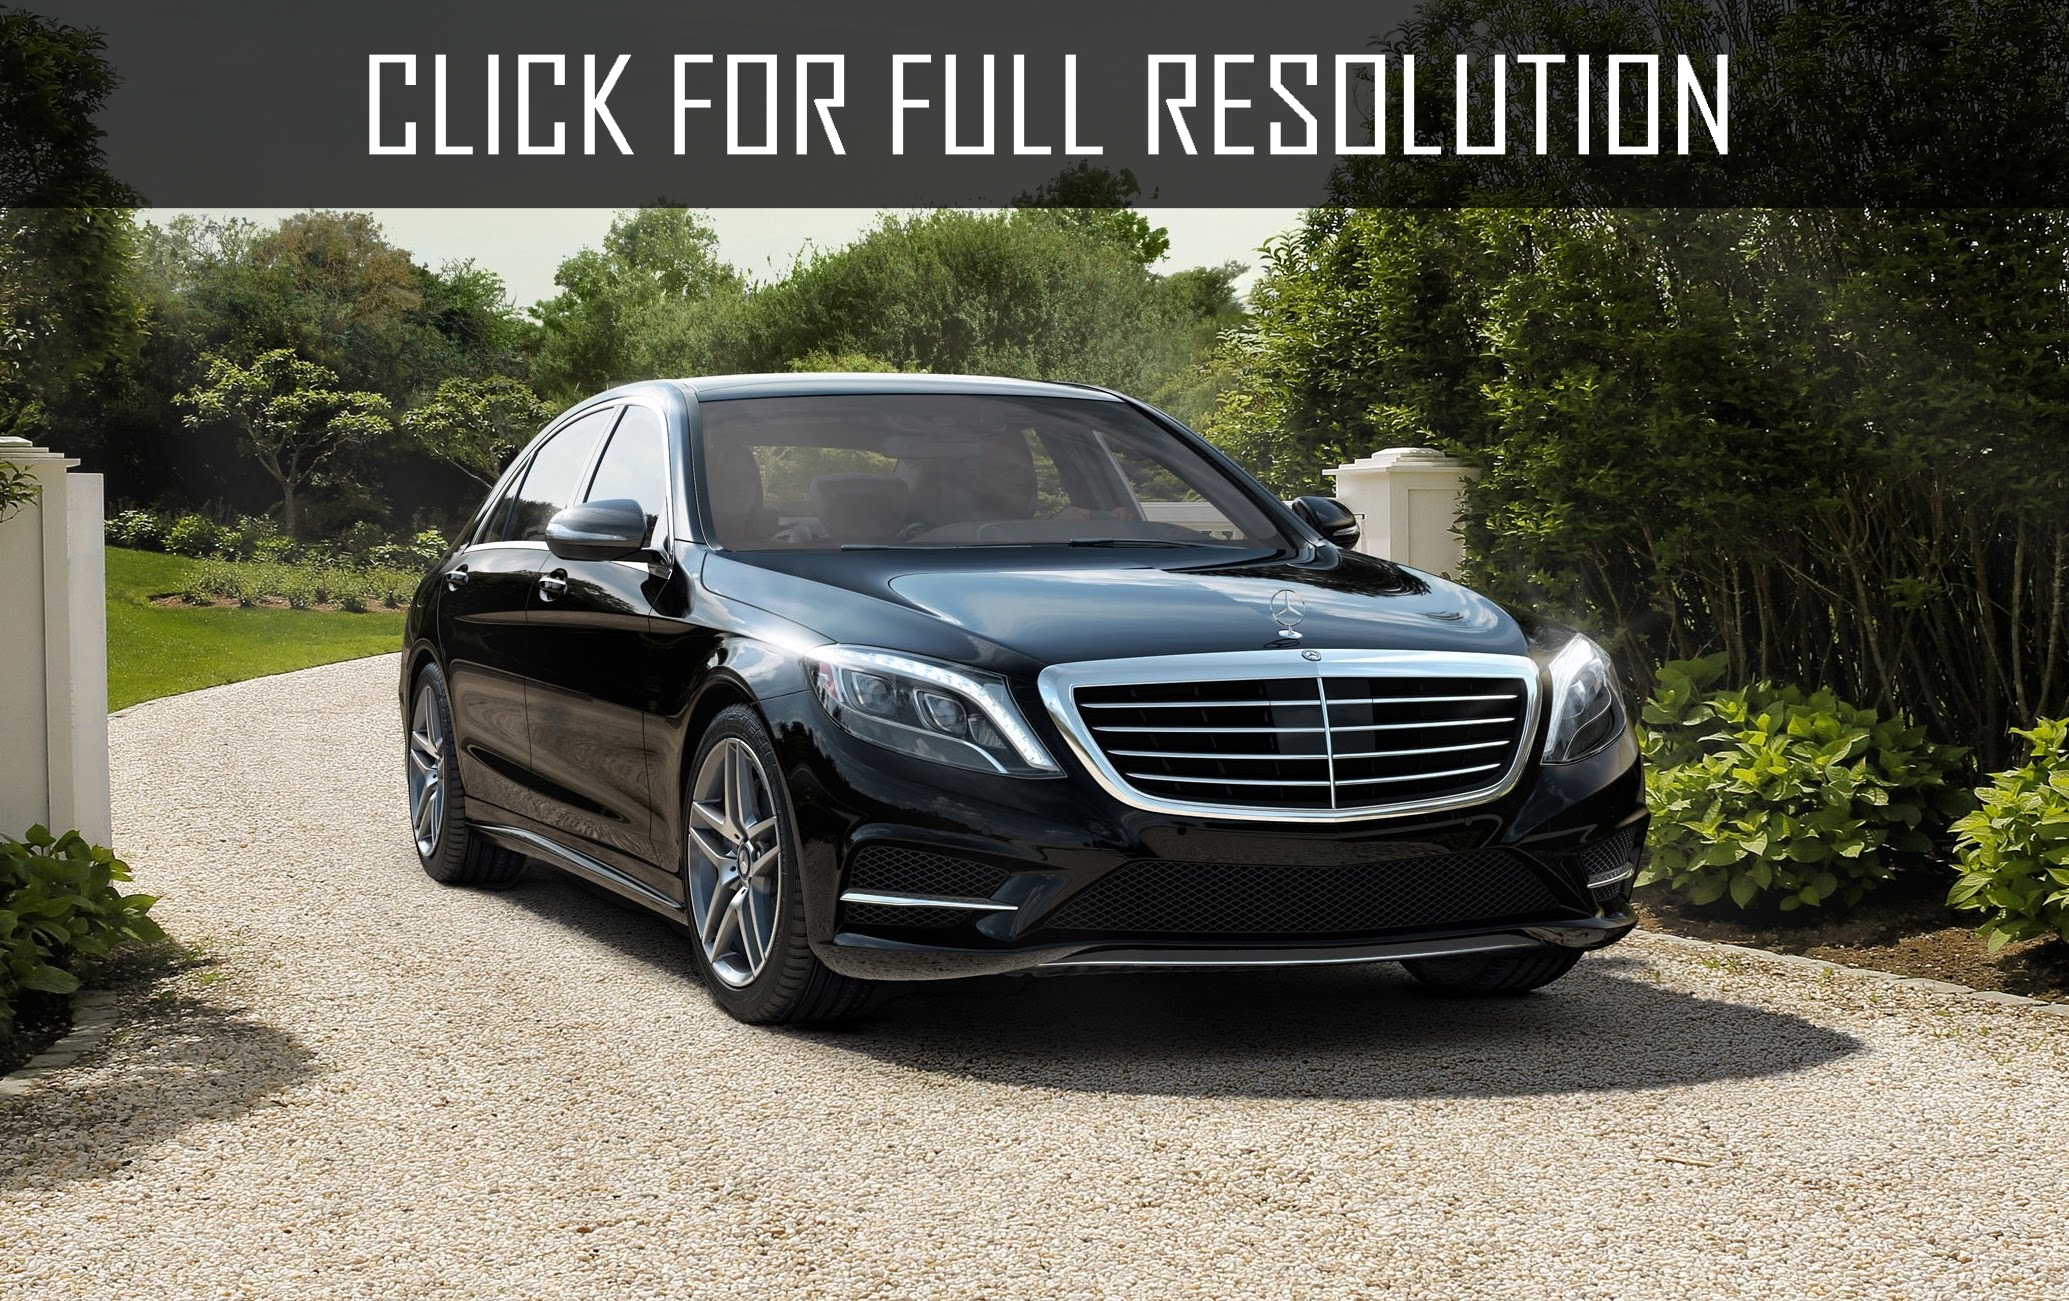 Mercedes Benz S600 Amg V12 amazing photo gallery, some information